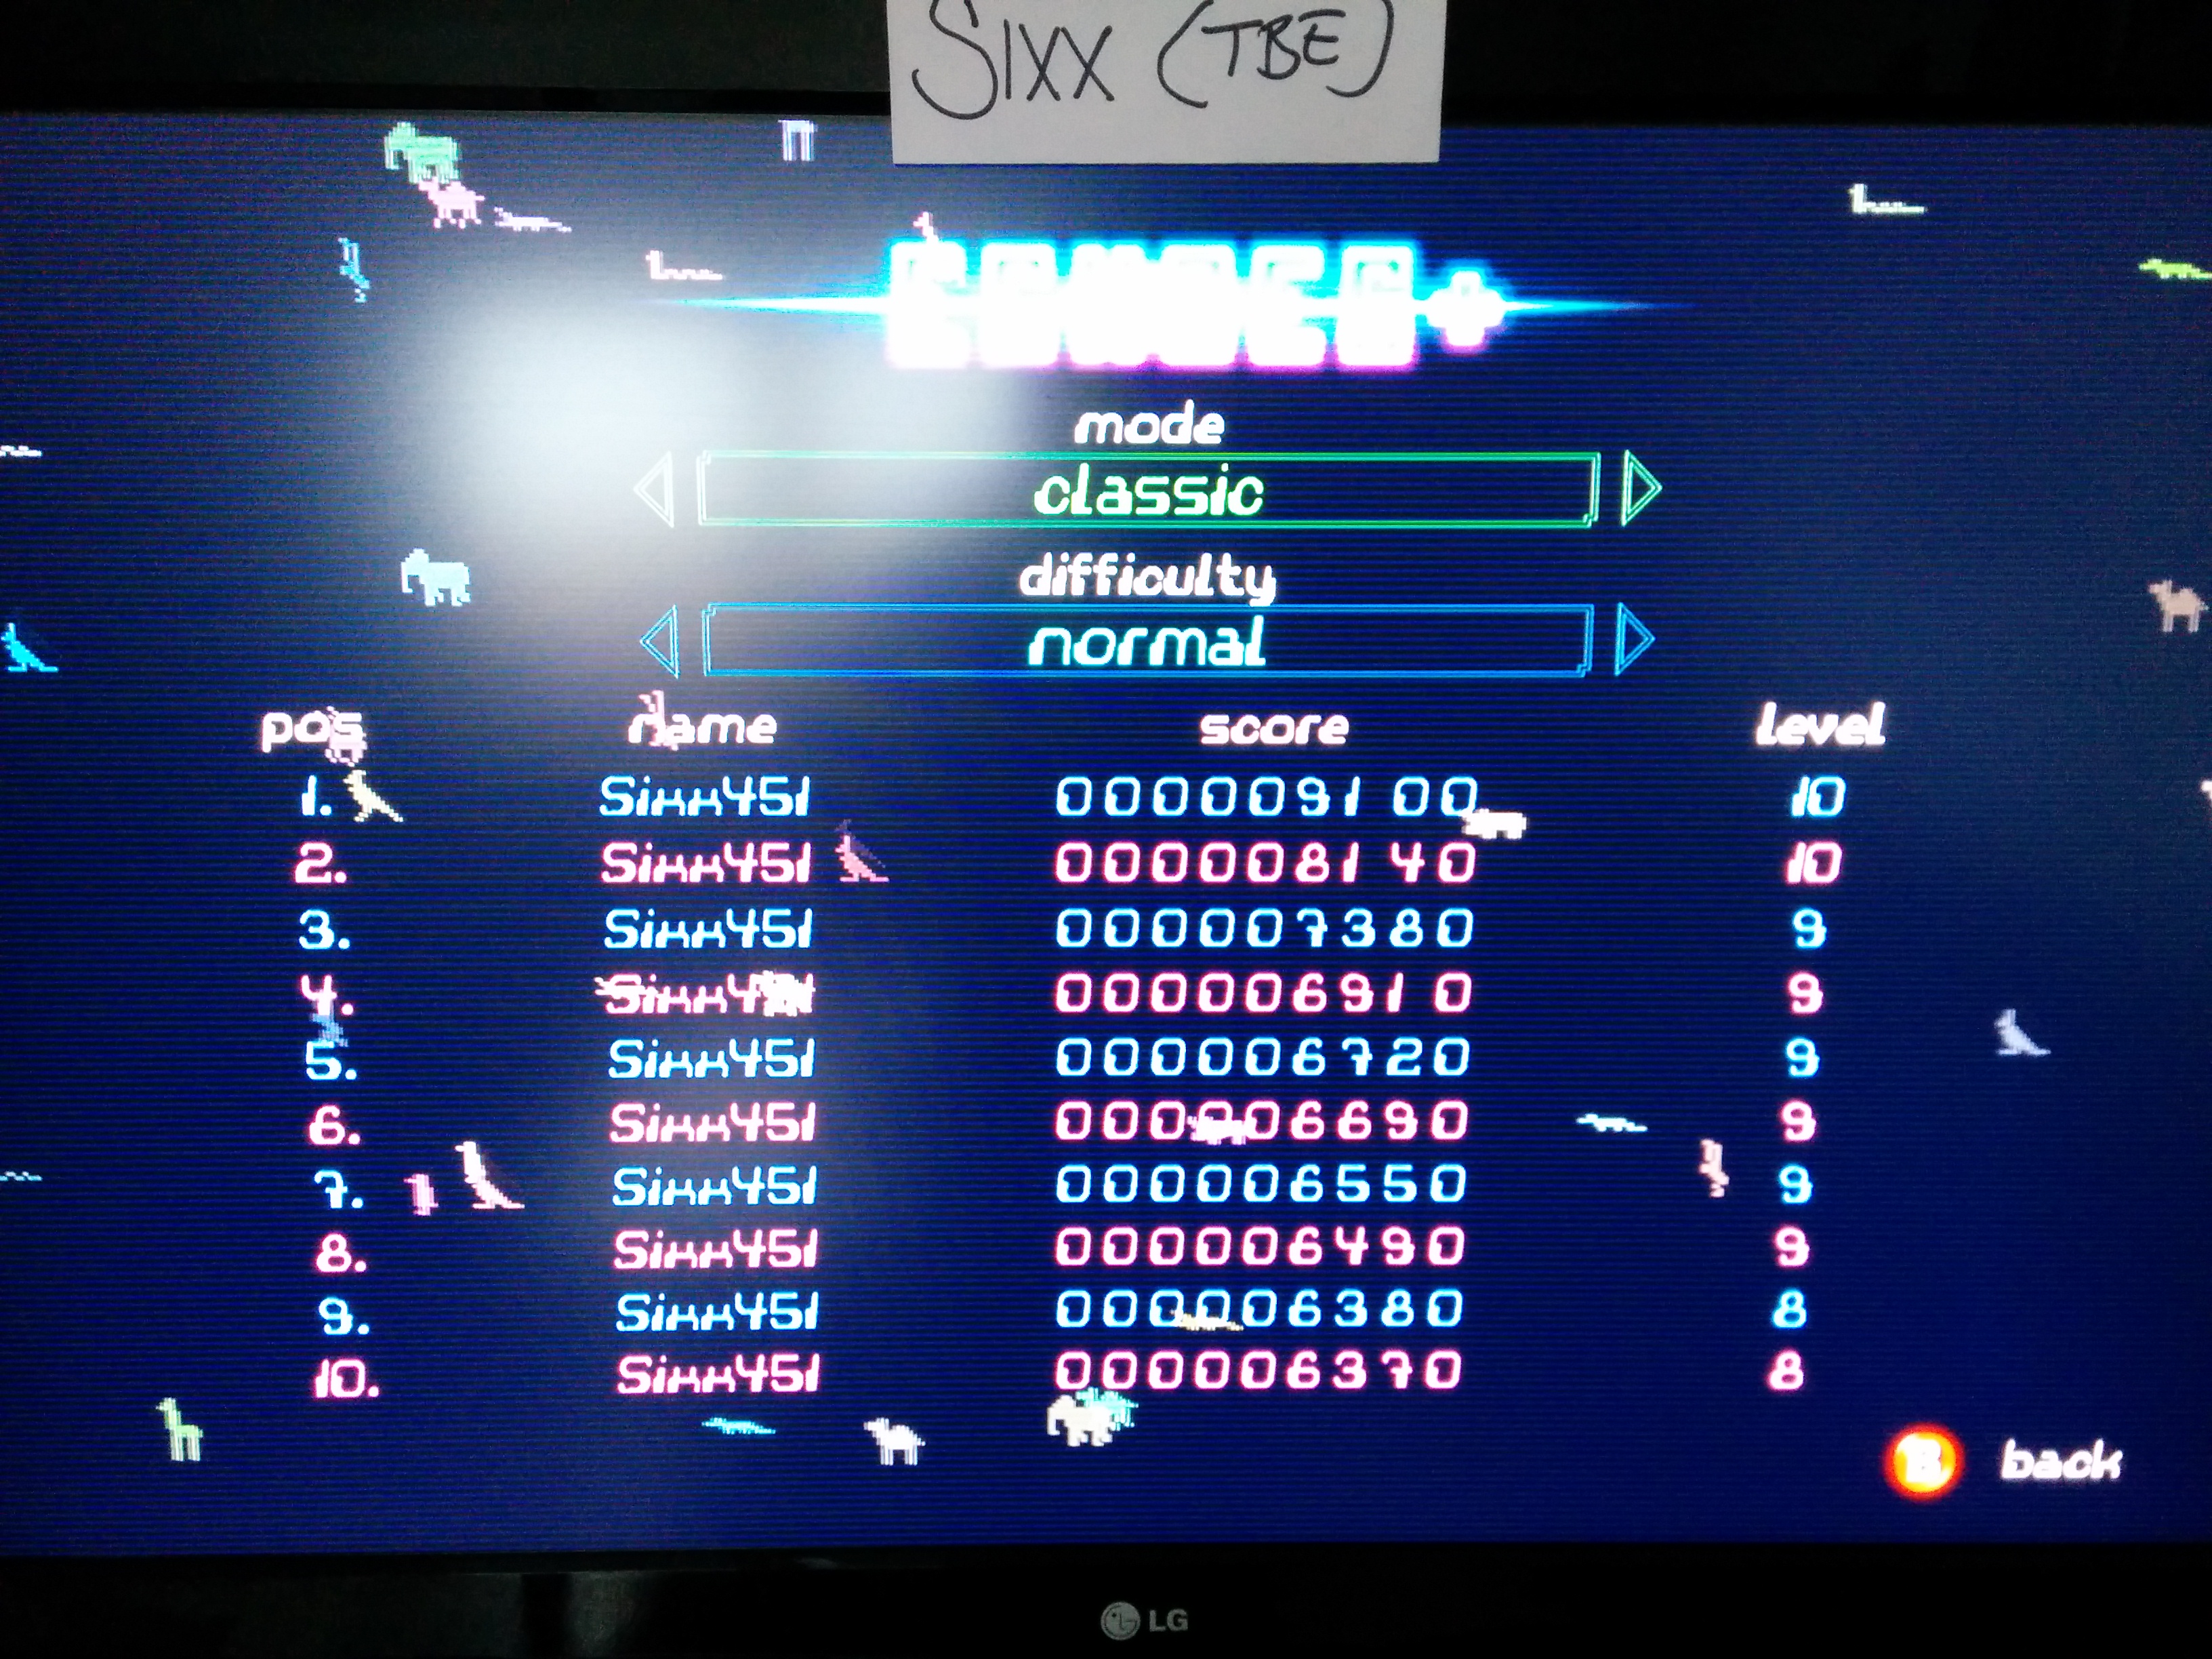 Sixx: Echoes+: Classic (Xbox 360) 9,100 points on 2014-04-17 10:02:07